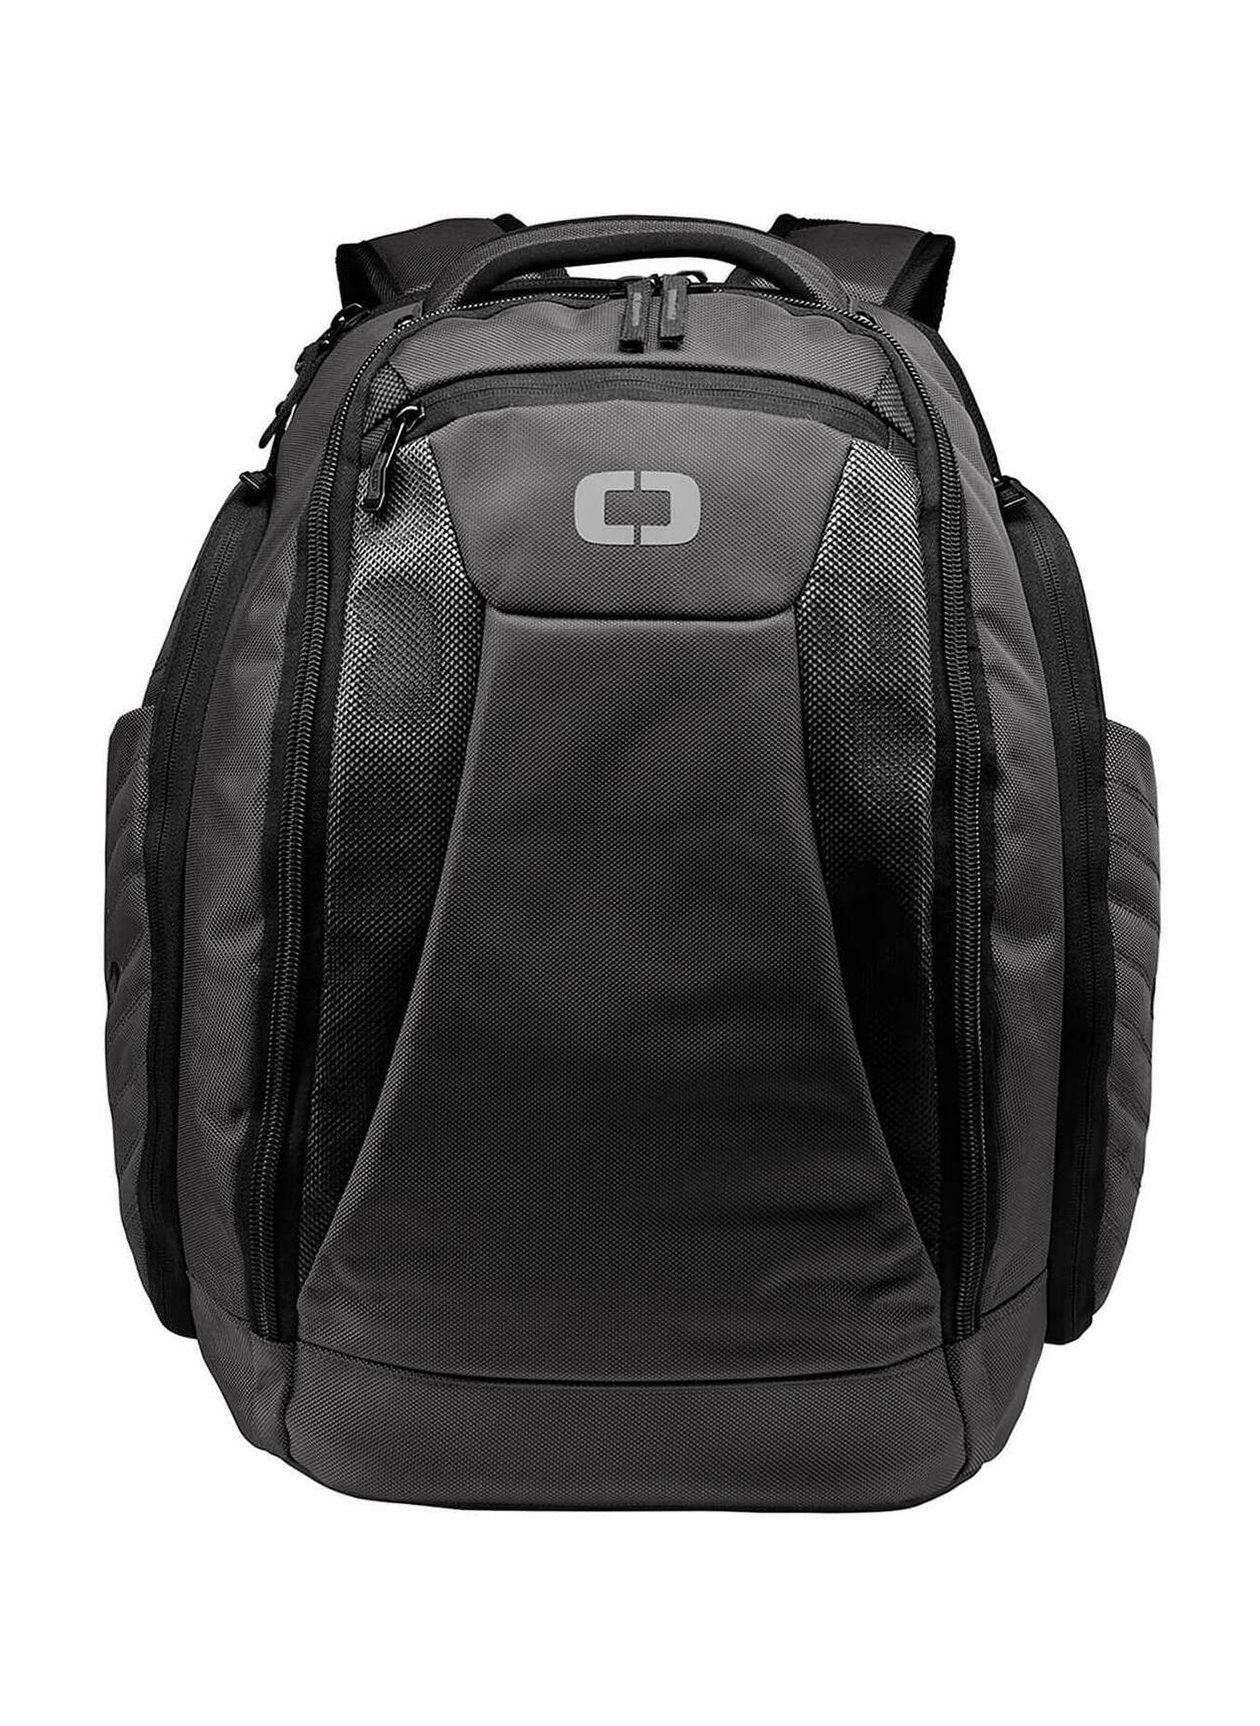 OGIO Tarmac Flashpoint Backpack